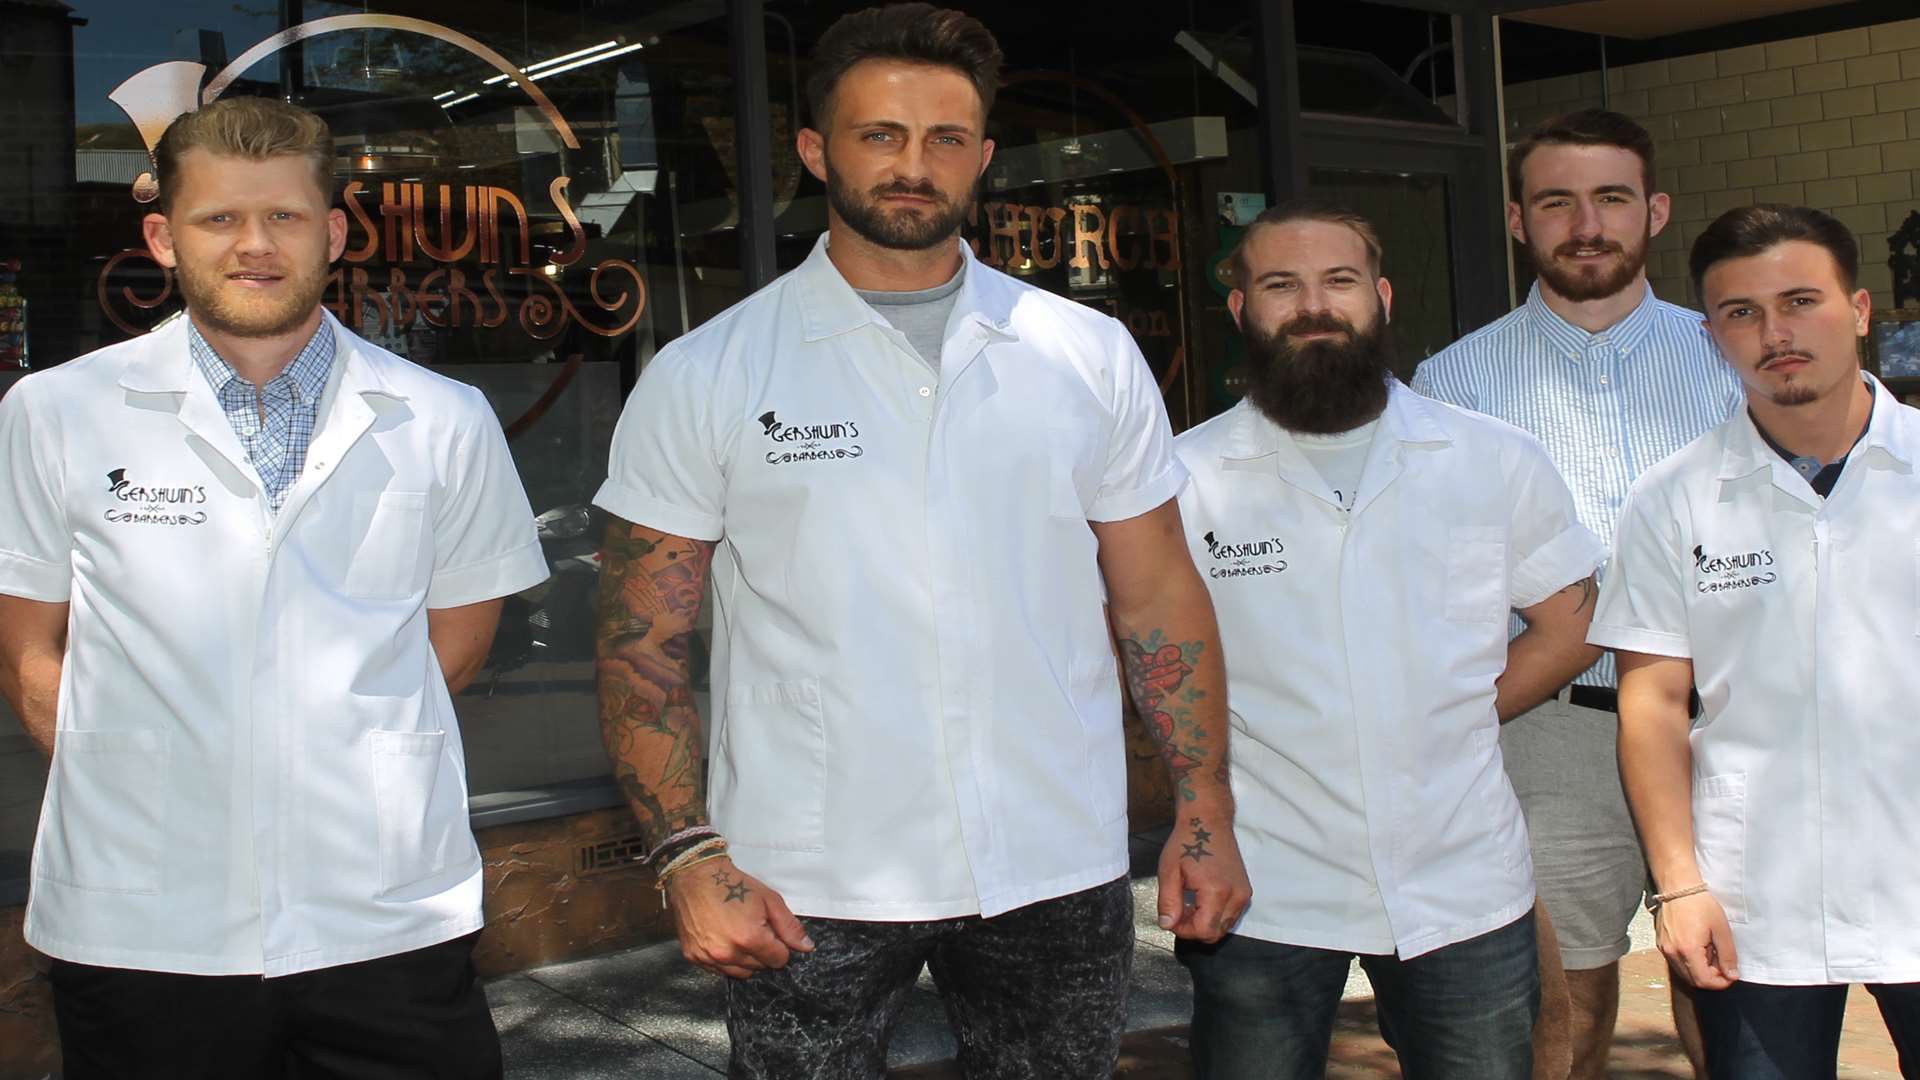 James Payne, owner of Gerswin's Barbers, second from left with his team.